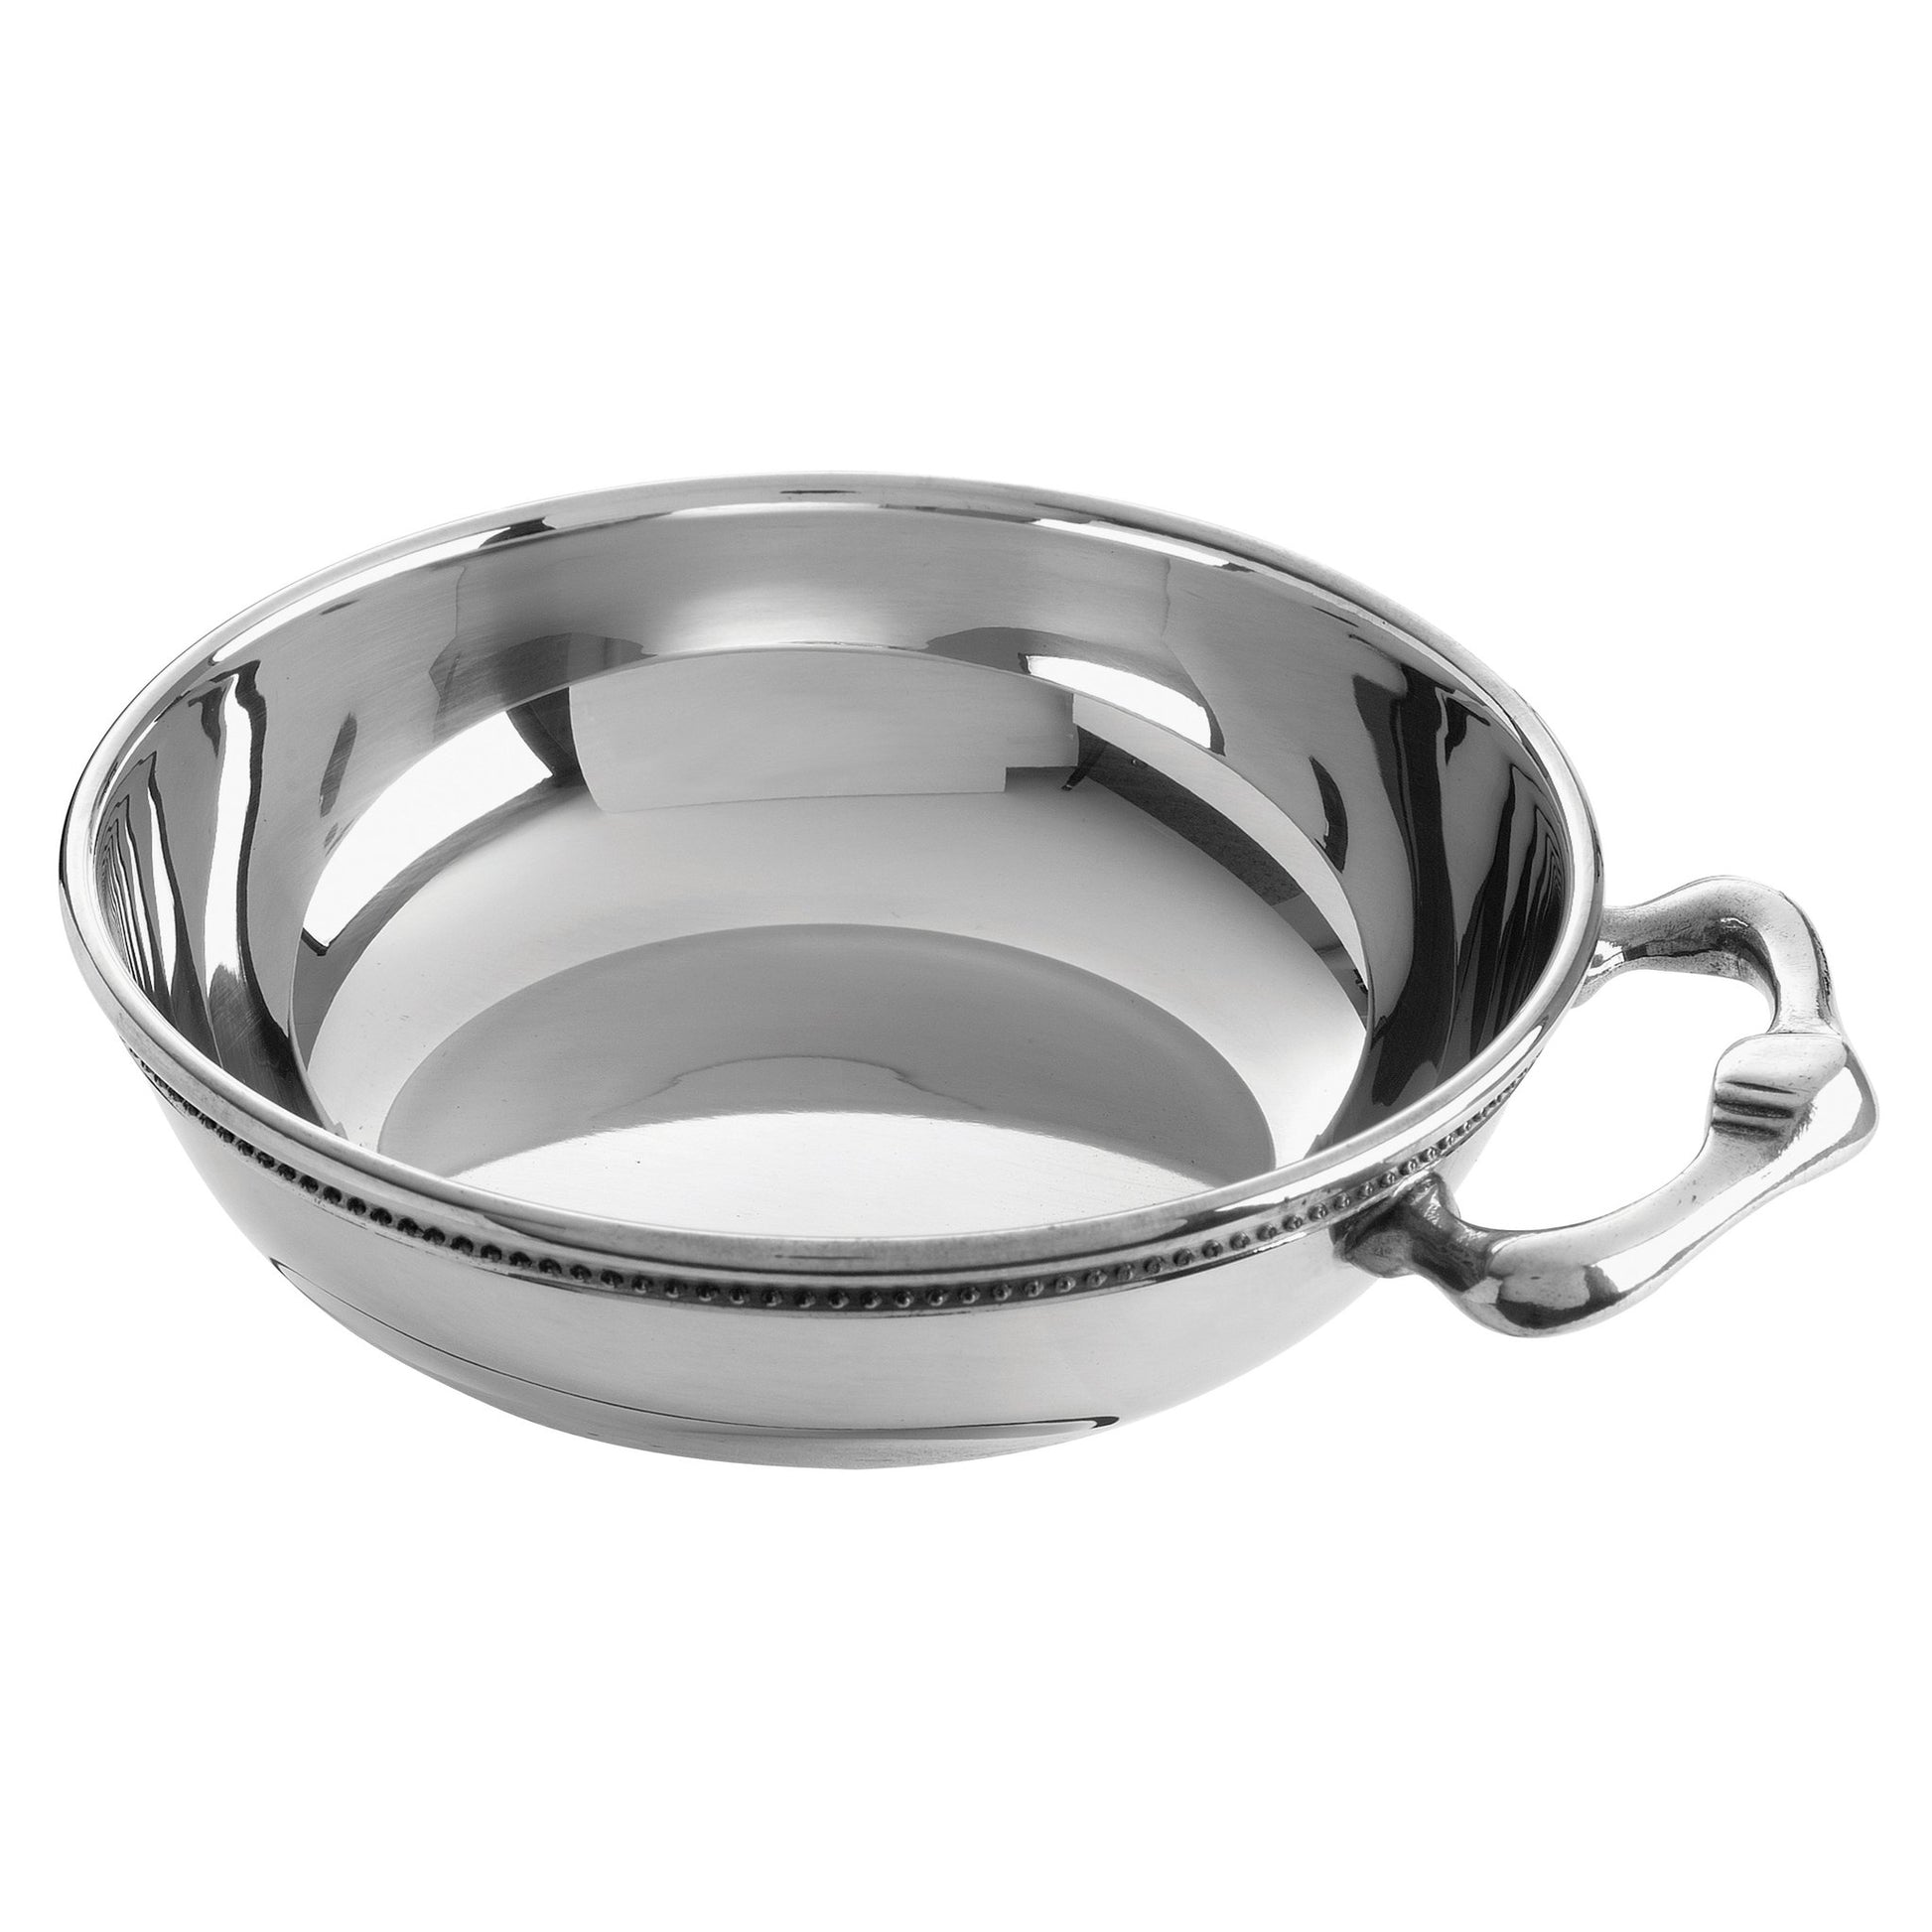 https://www.templetonsilver.com/cdn/shop/products/images-of-america-baby-porringer-bowl-templeton-silver_212abe80-6f34-4936-a63f-369045be3341.jpg?v=1632588975&width=1946